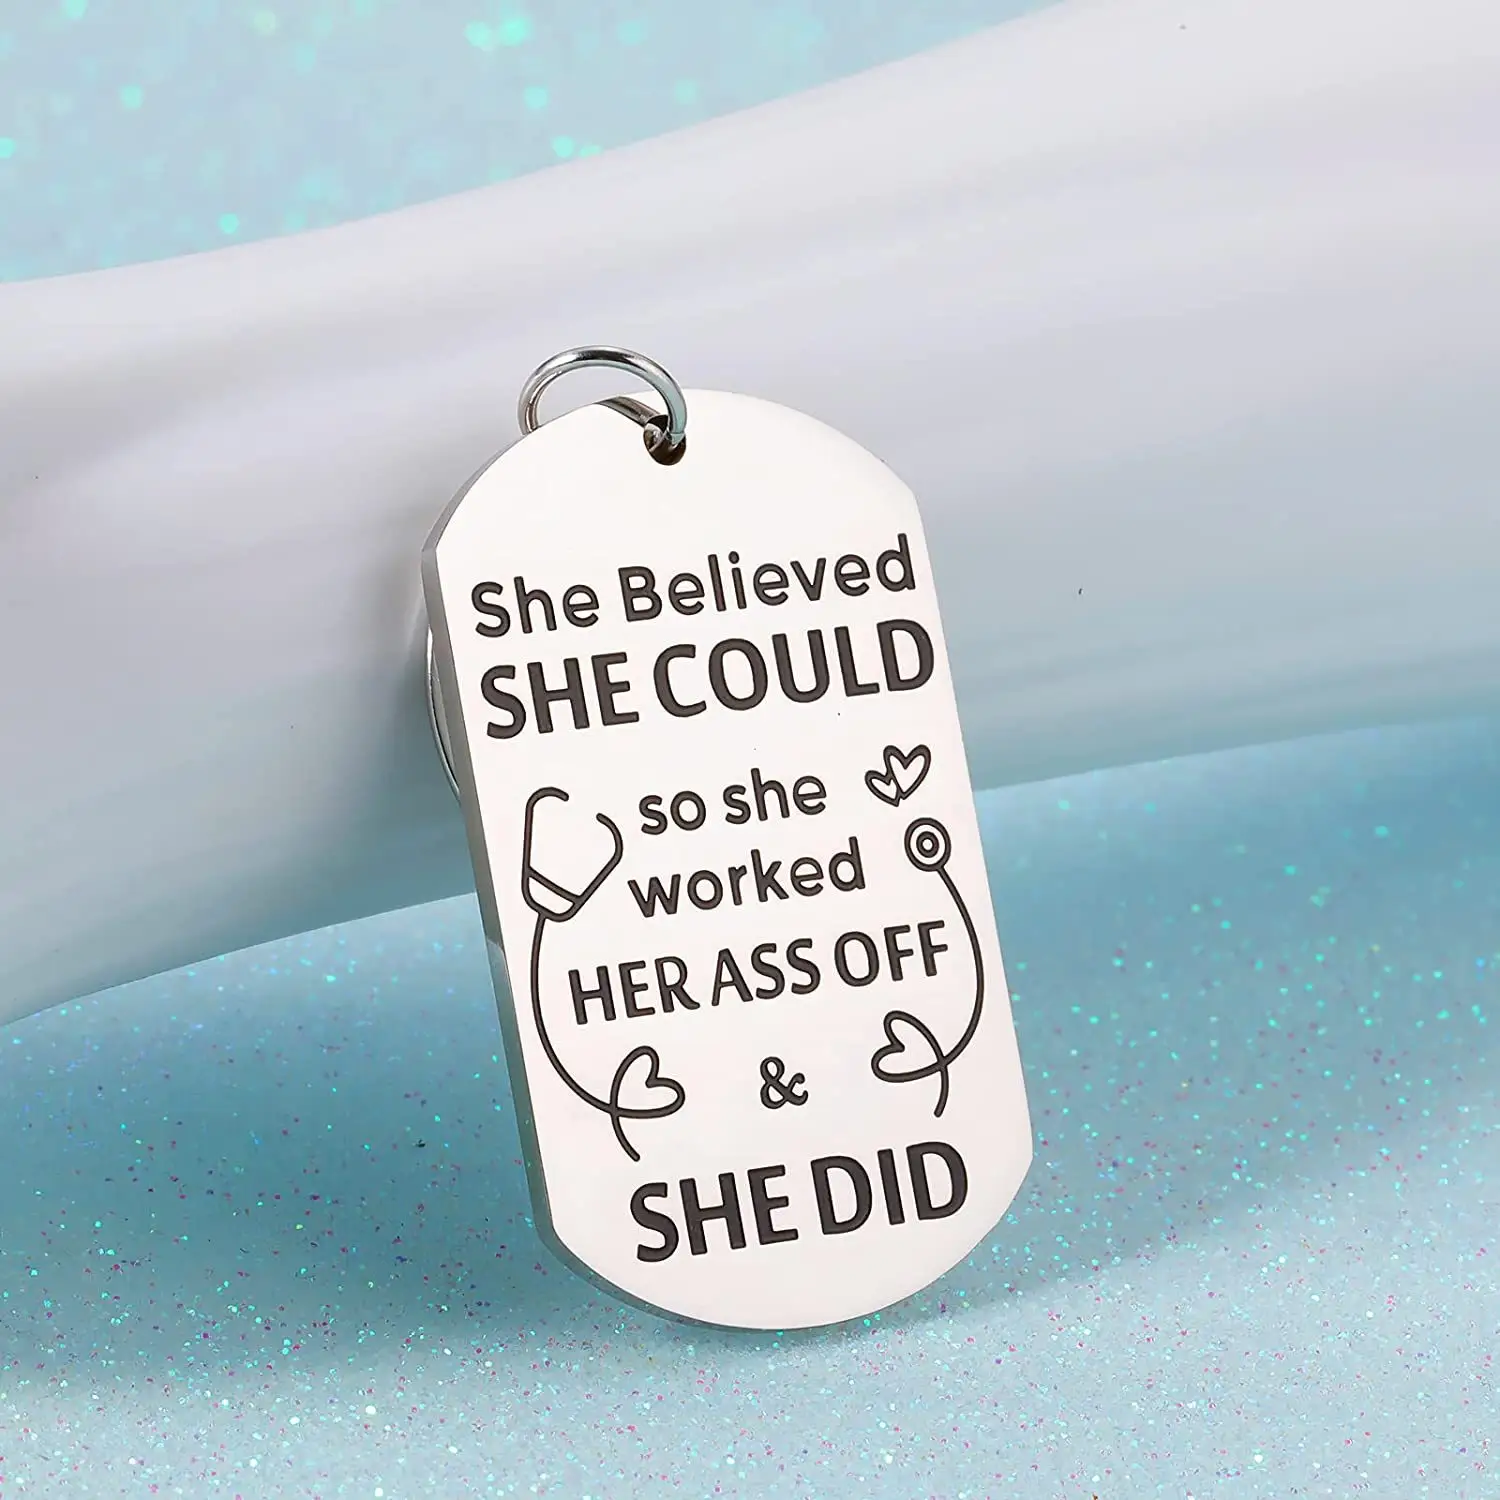 Customizable Metal Colleague Friends Family Gift Stainless Steel Keychain Keyring Hanging Ornament Letter She believed SHE COULD